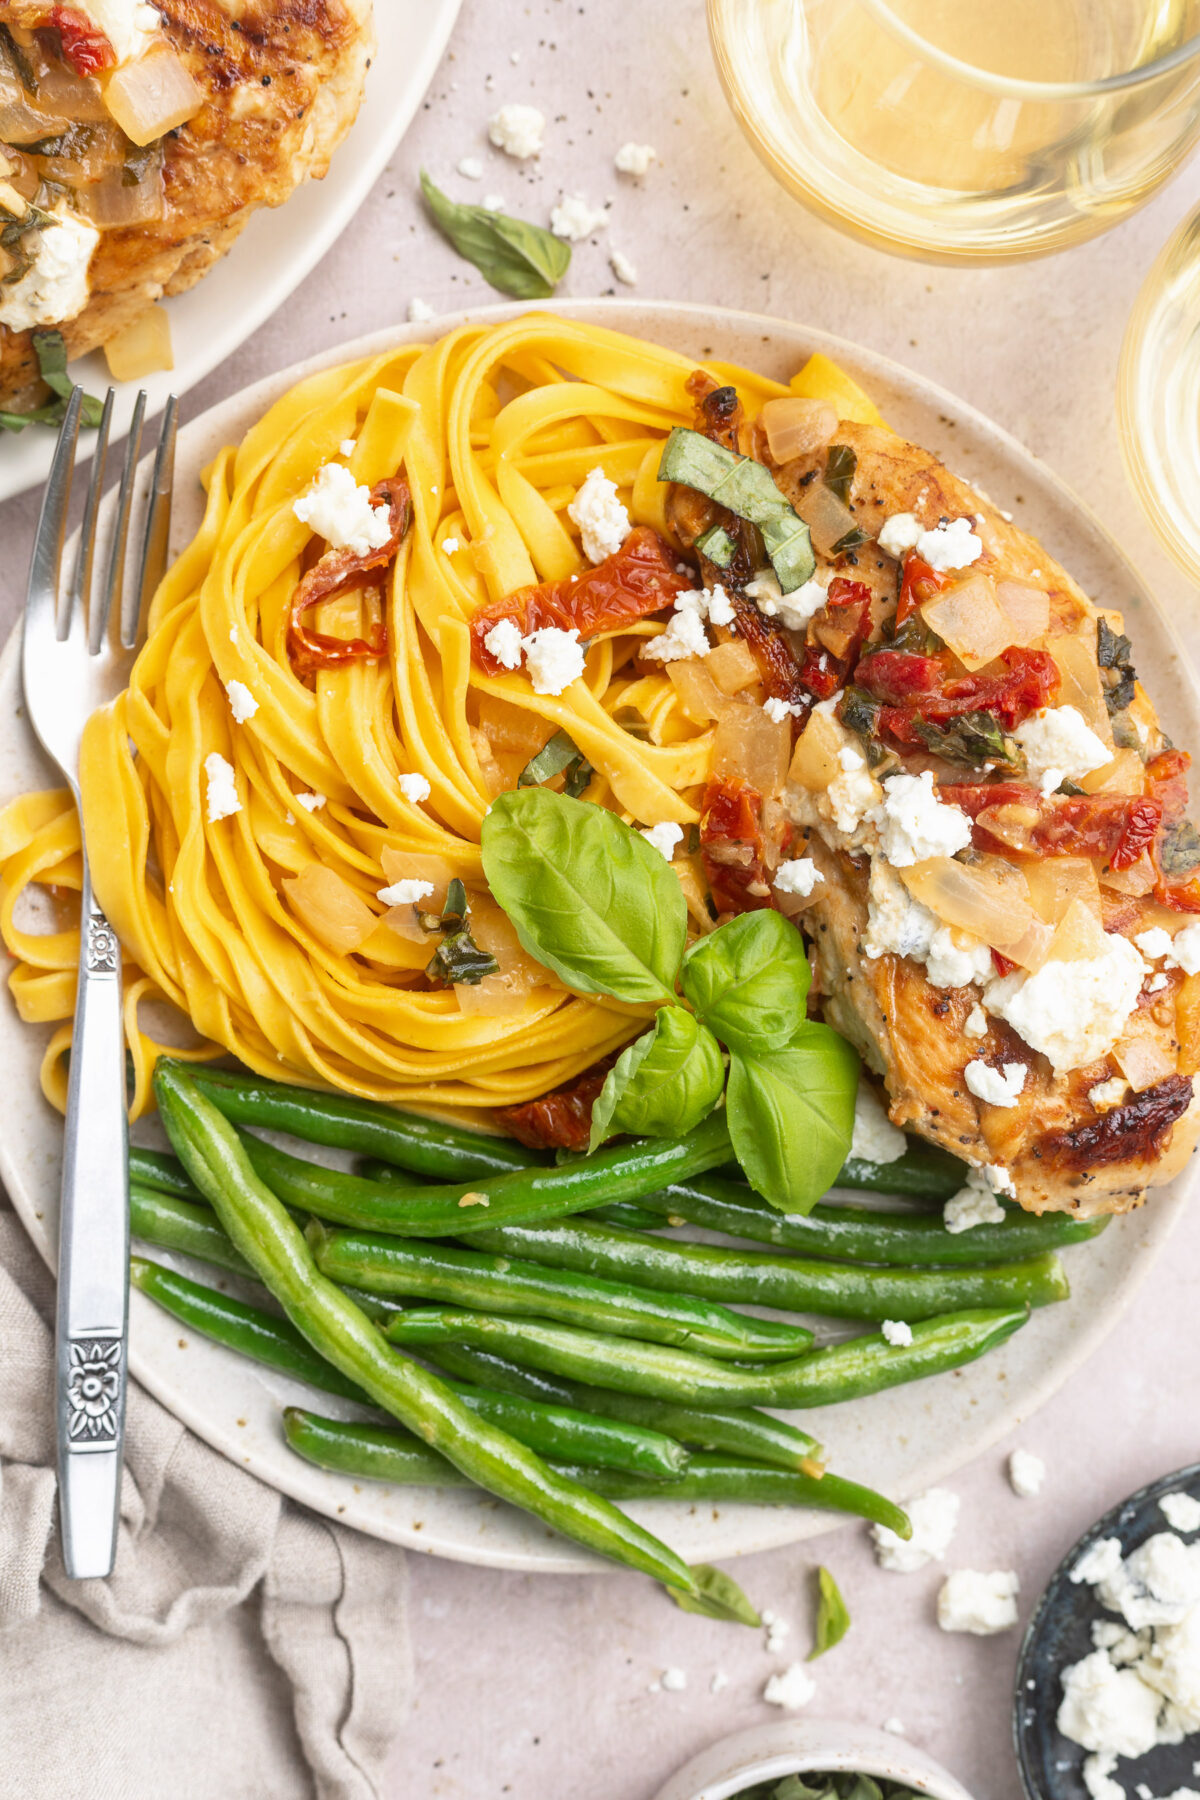 Chicken Bryan plated with swirled pasta and tender green beans, with goat cheese, sun-dried tomatoes, and basil.